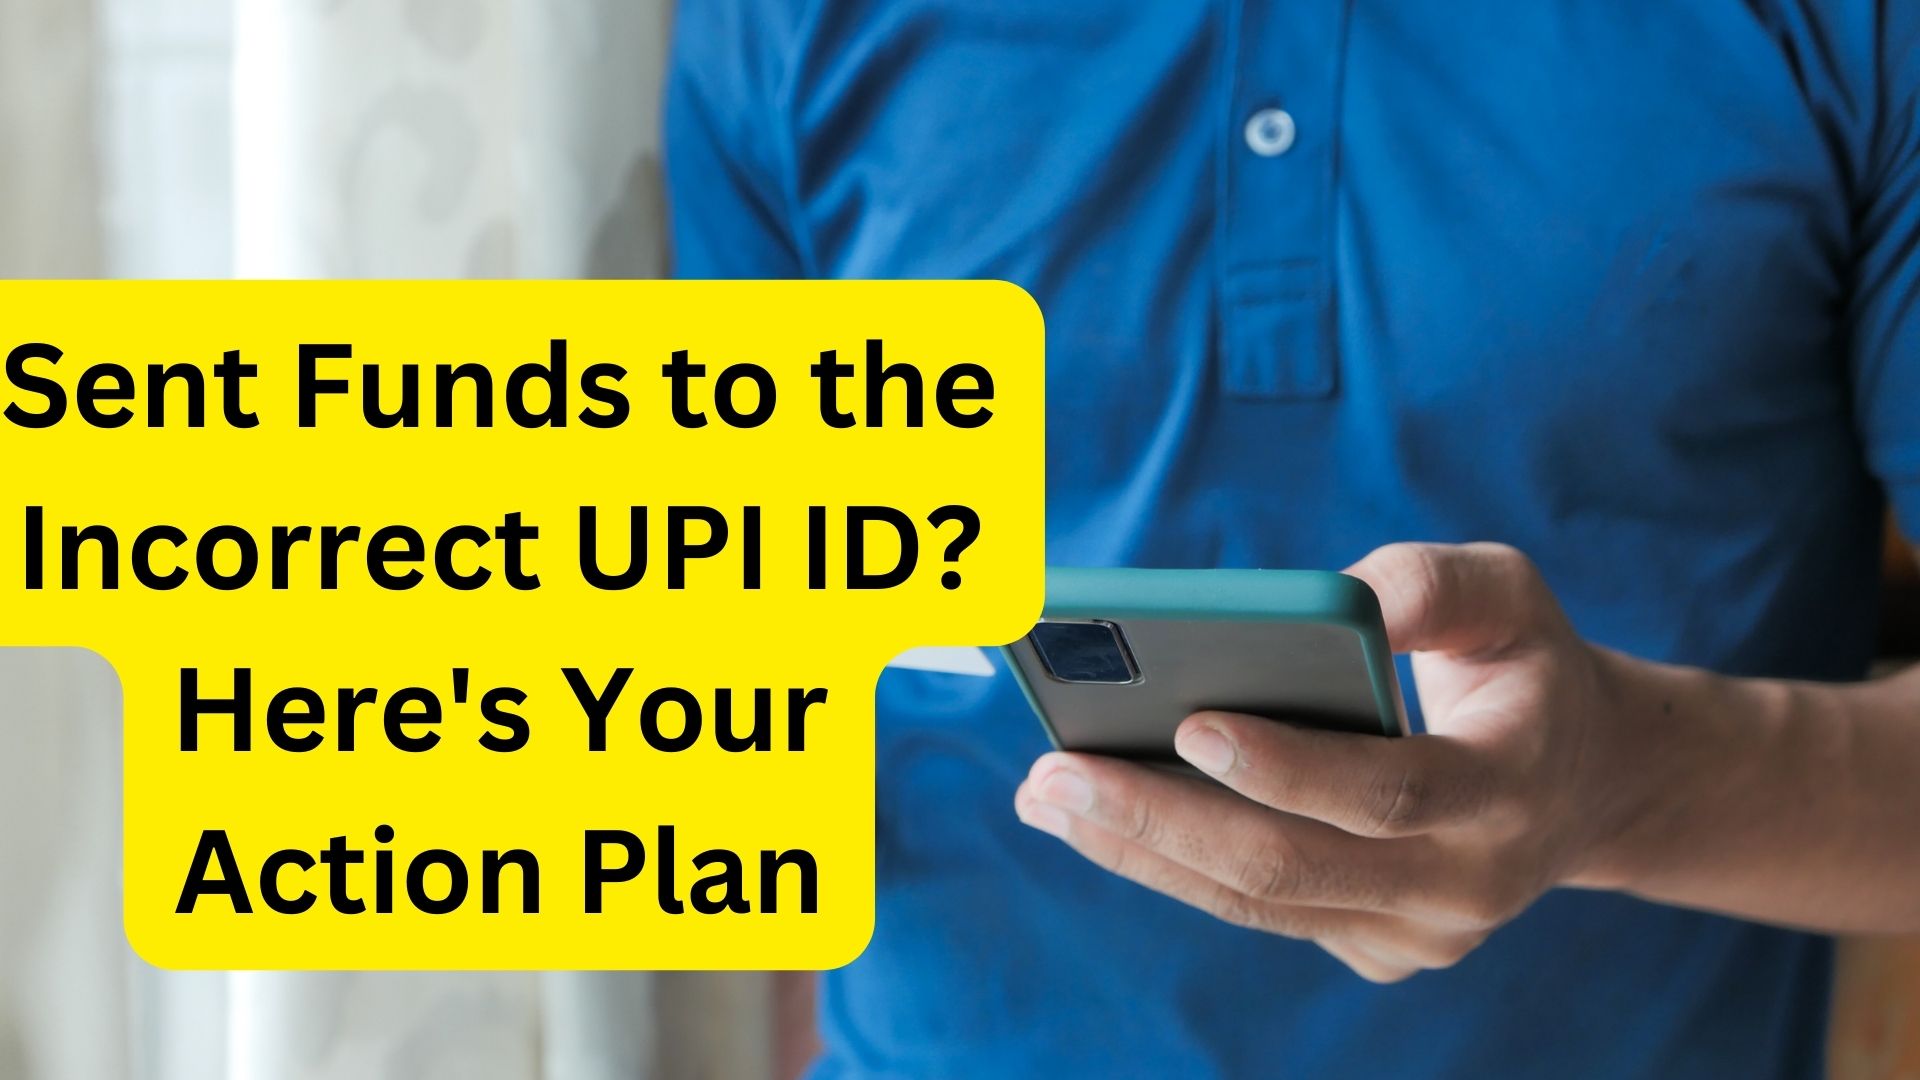 Sent Funds to the Incorrect UPI ID? Here's Your Action Plan